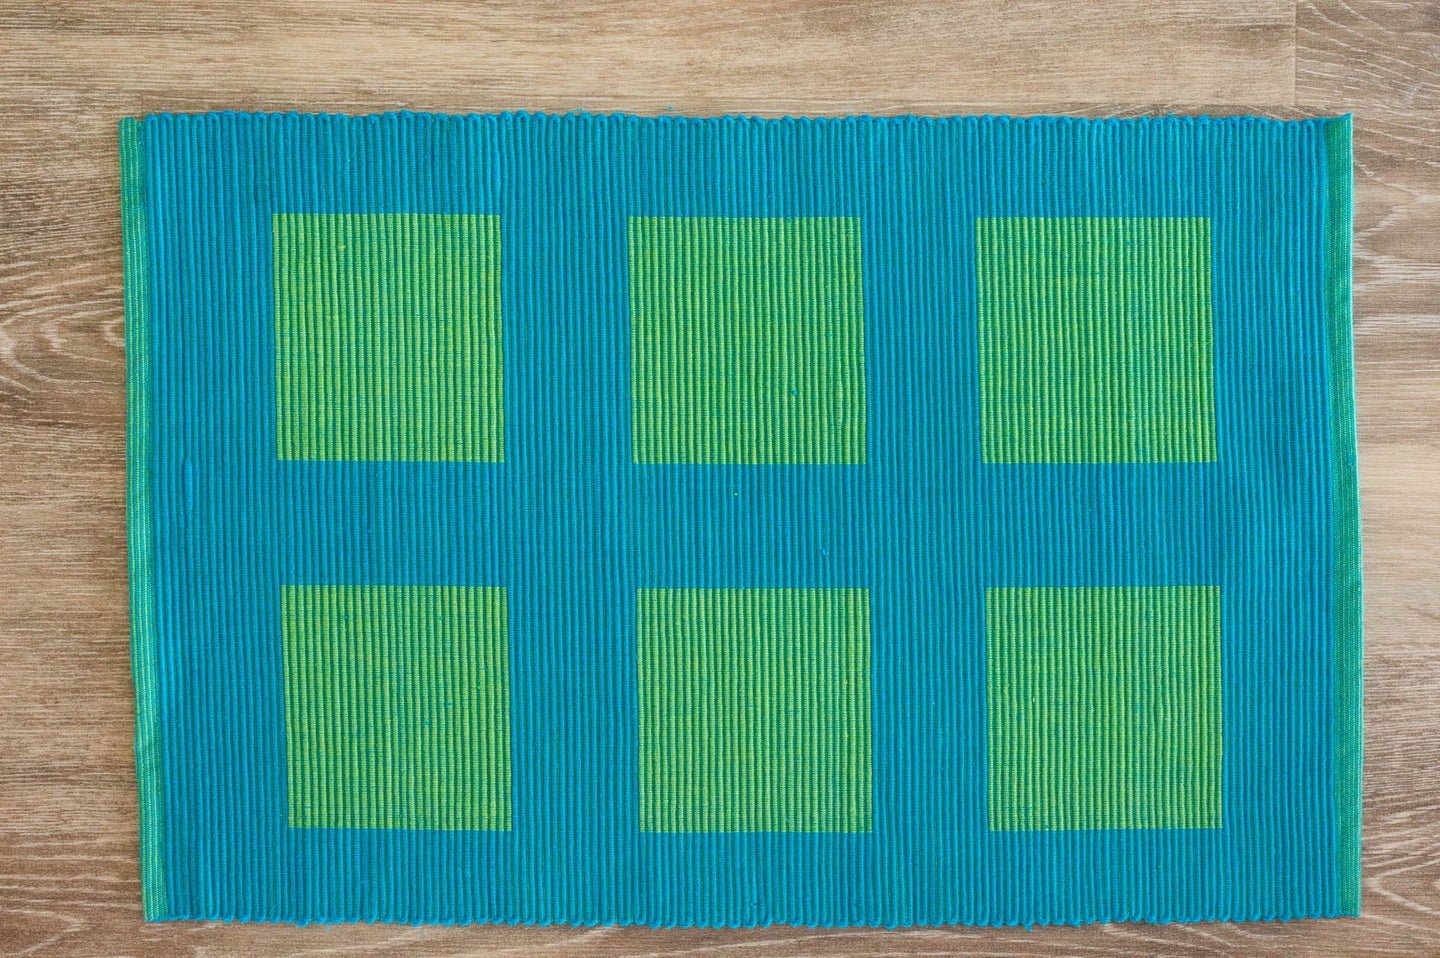 Triton Blue and Green Placemats - Set of 2